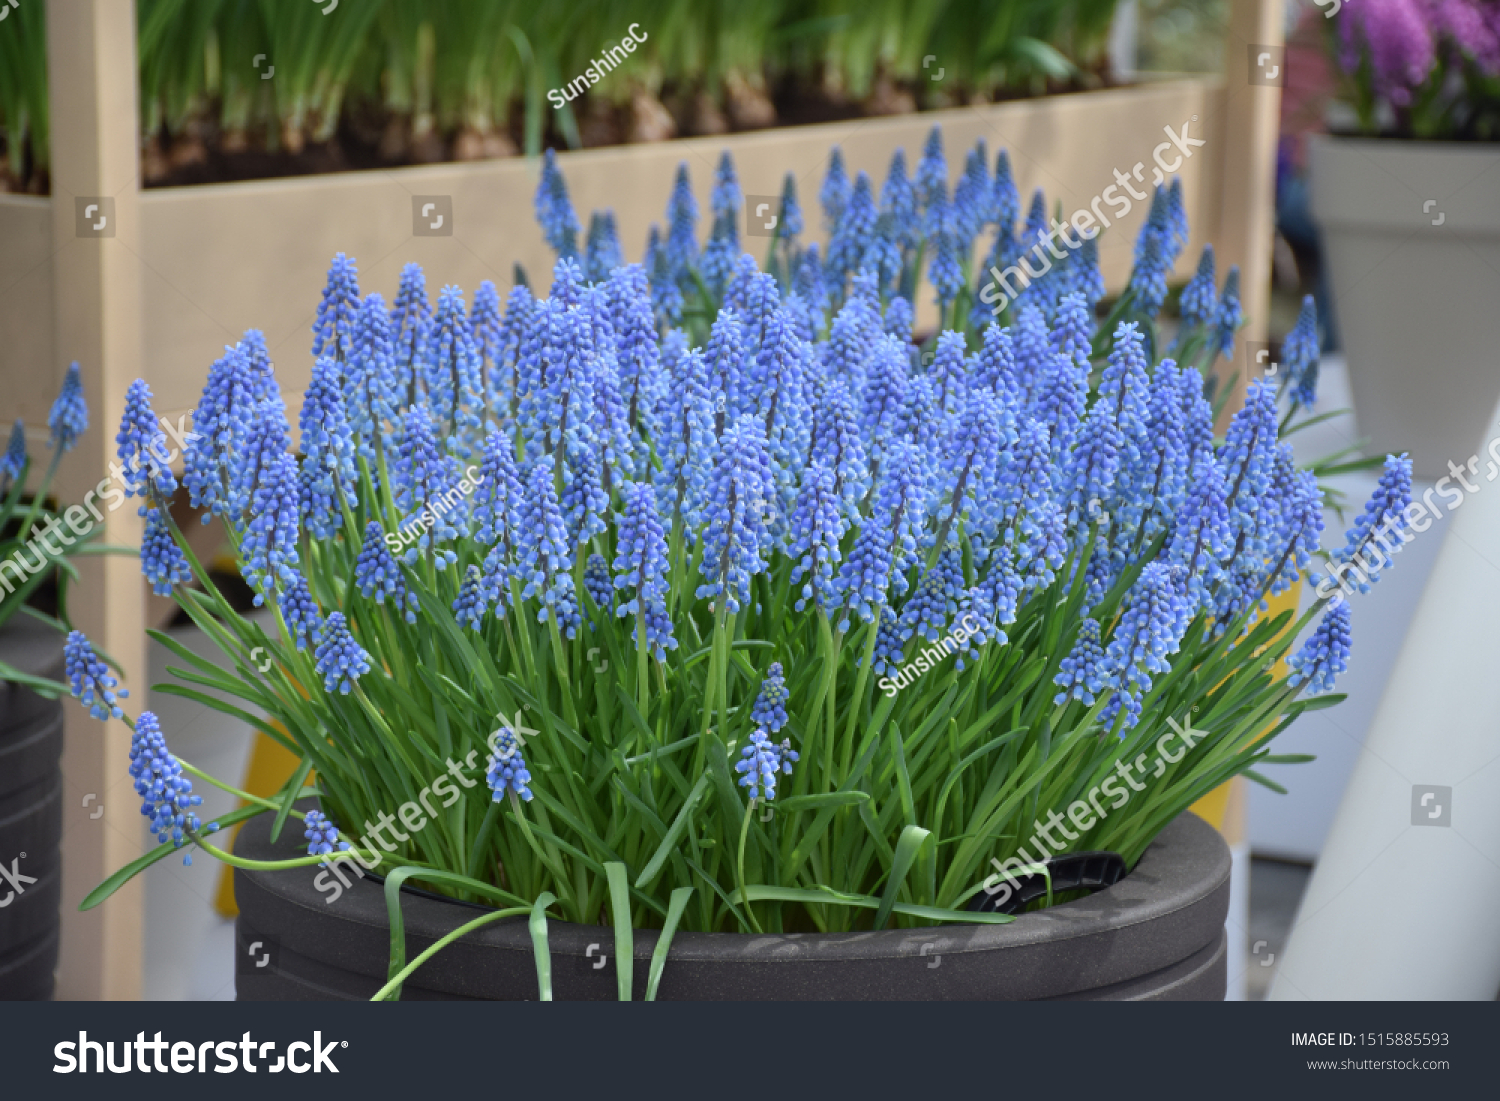 Small blue bell shaped flowers (Grape Hyacinth) in clay pot container barrel, outdoor growing flower pot for balcony.  #1515885593